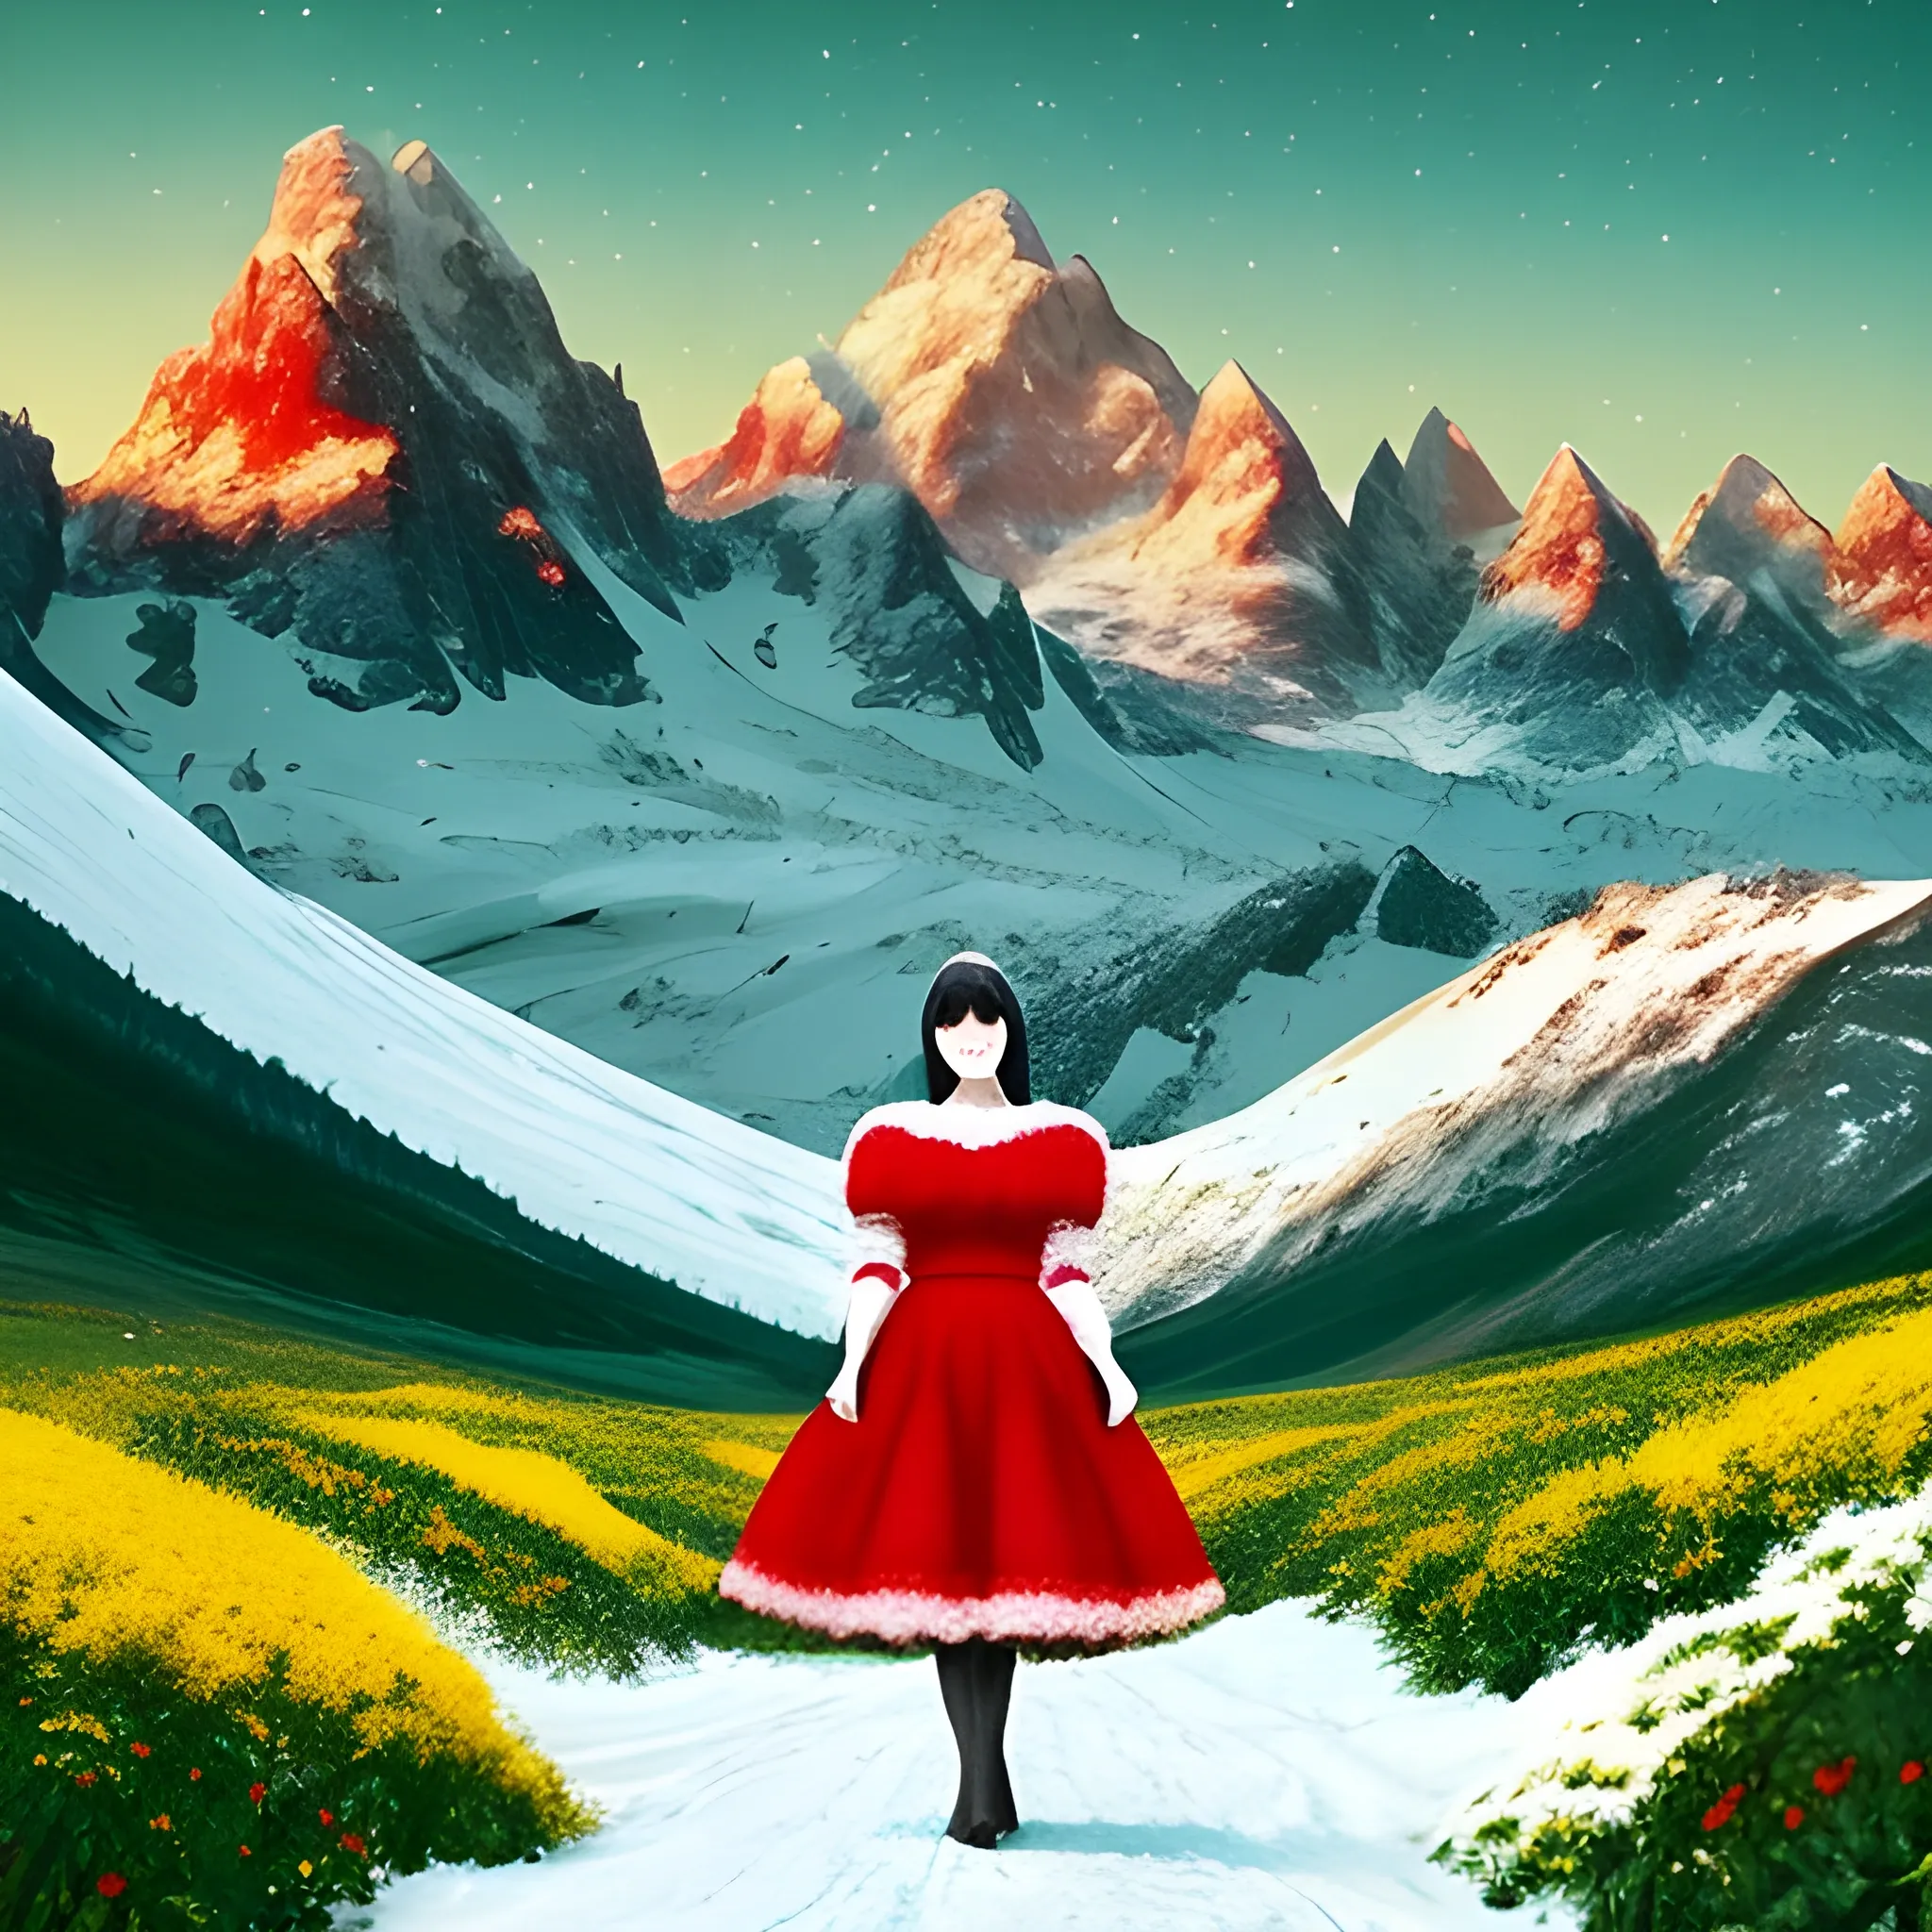 Russian landscape snowing, black-haired woman in the middle of the landscape holding a furry white cat, wearing a light red dress, large mountains in the background and the green floor with yellow flowers shows
, Trippy